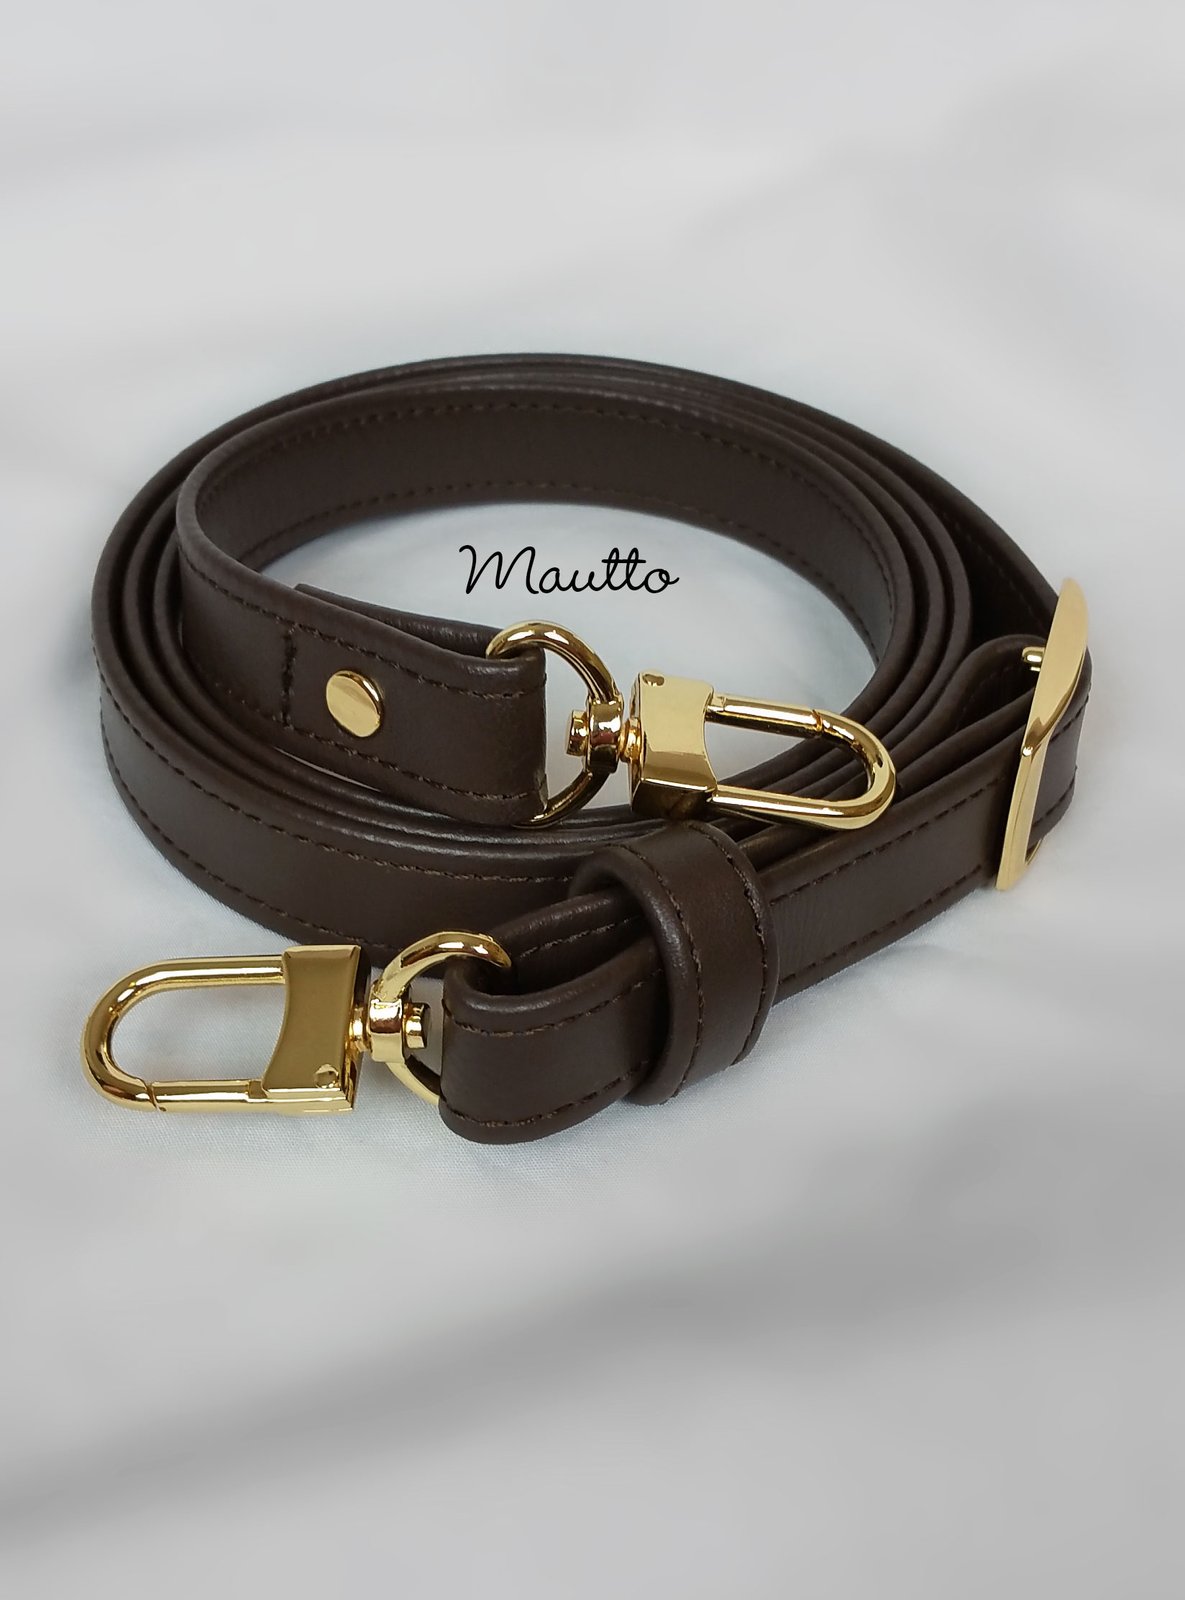 Brown Leather Strap for Louis Vuitton Speedy/Trevi/etc, 3/4" Wide, Handle to Crossbody Lengths | Replacement Purse Straps & Handbag Accessories - Leather, Chain & more | Mautto